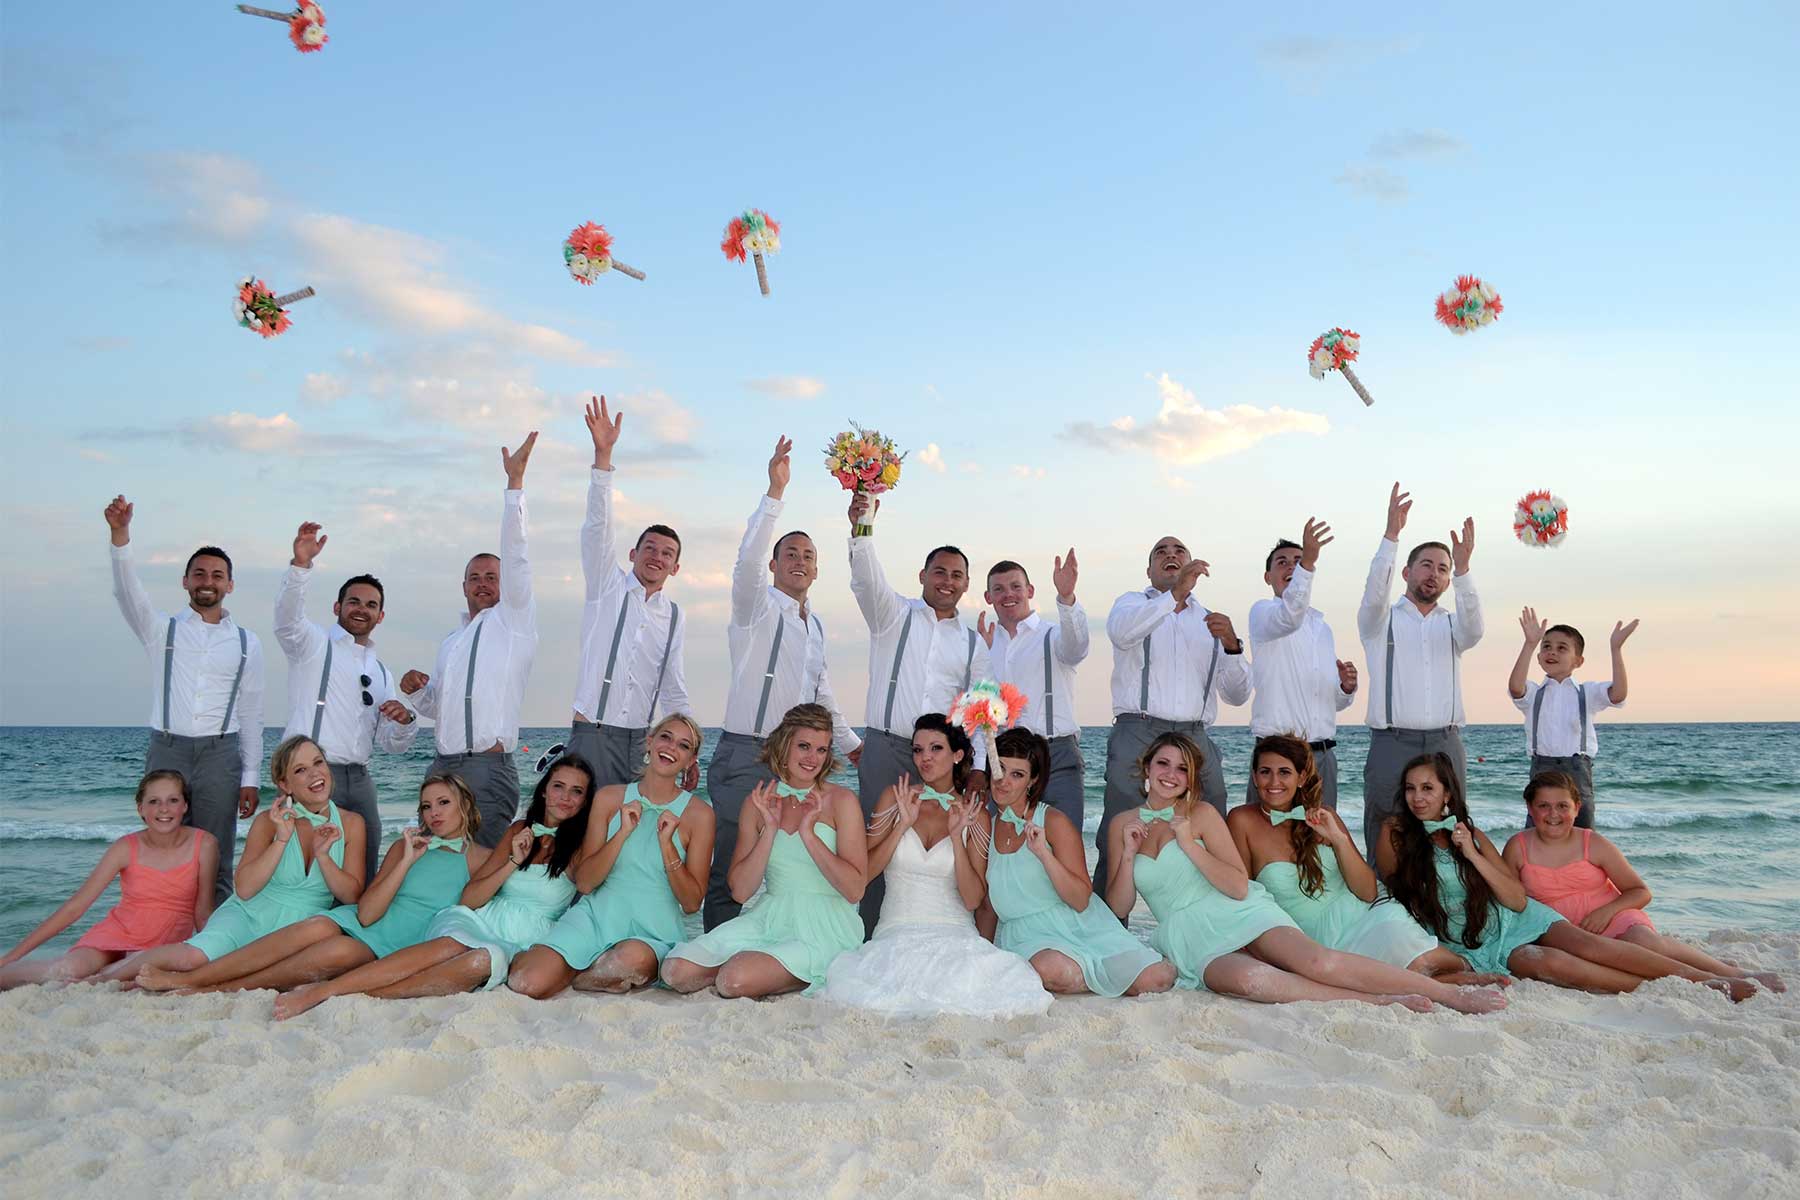 An action photo of the wedding party posed on the beach in front of a beautiful sunset.